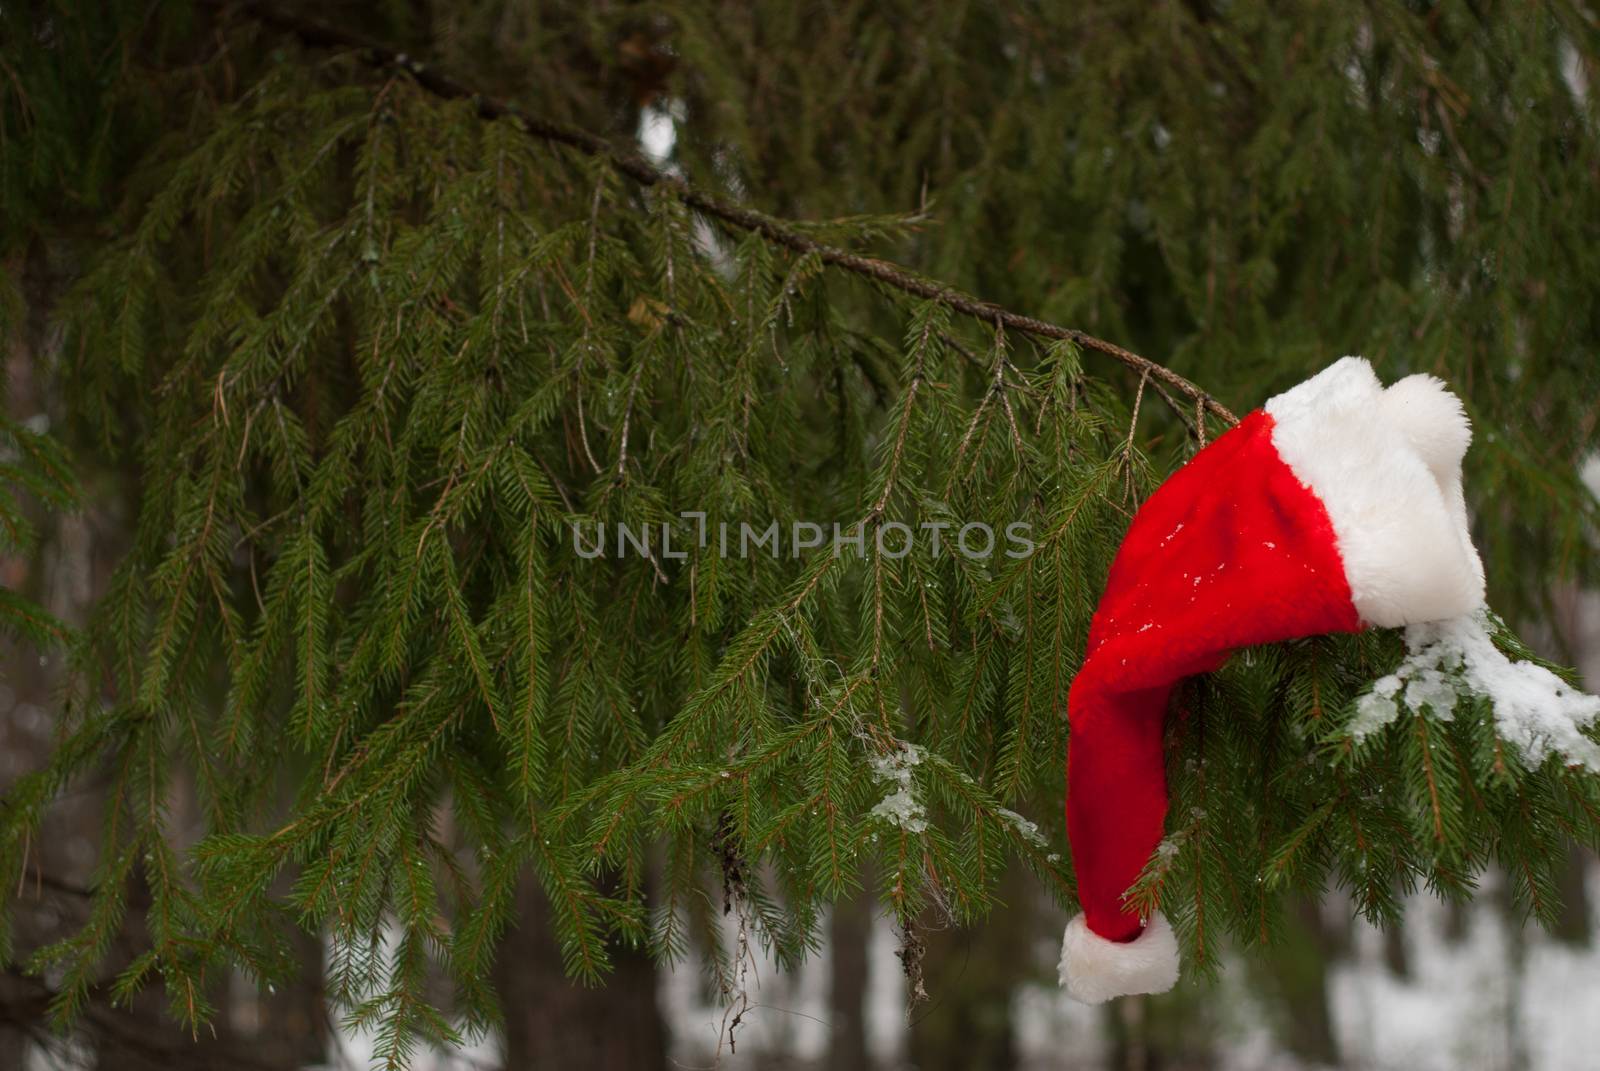 Red Santa hat, the Christmas tree in the winter forest, copyspace, happy winter holidays